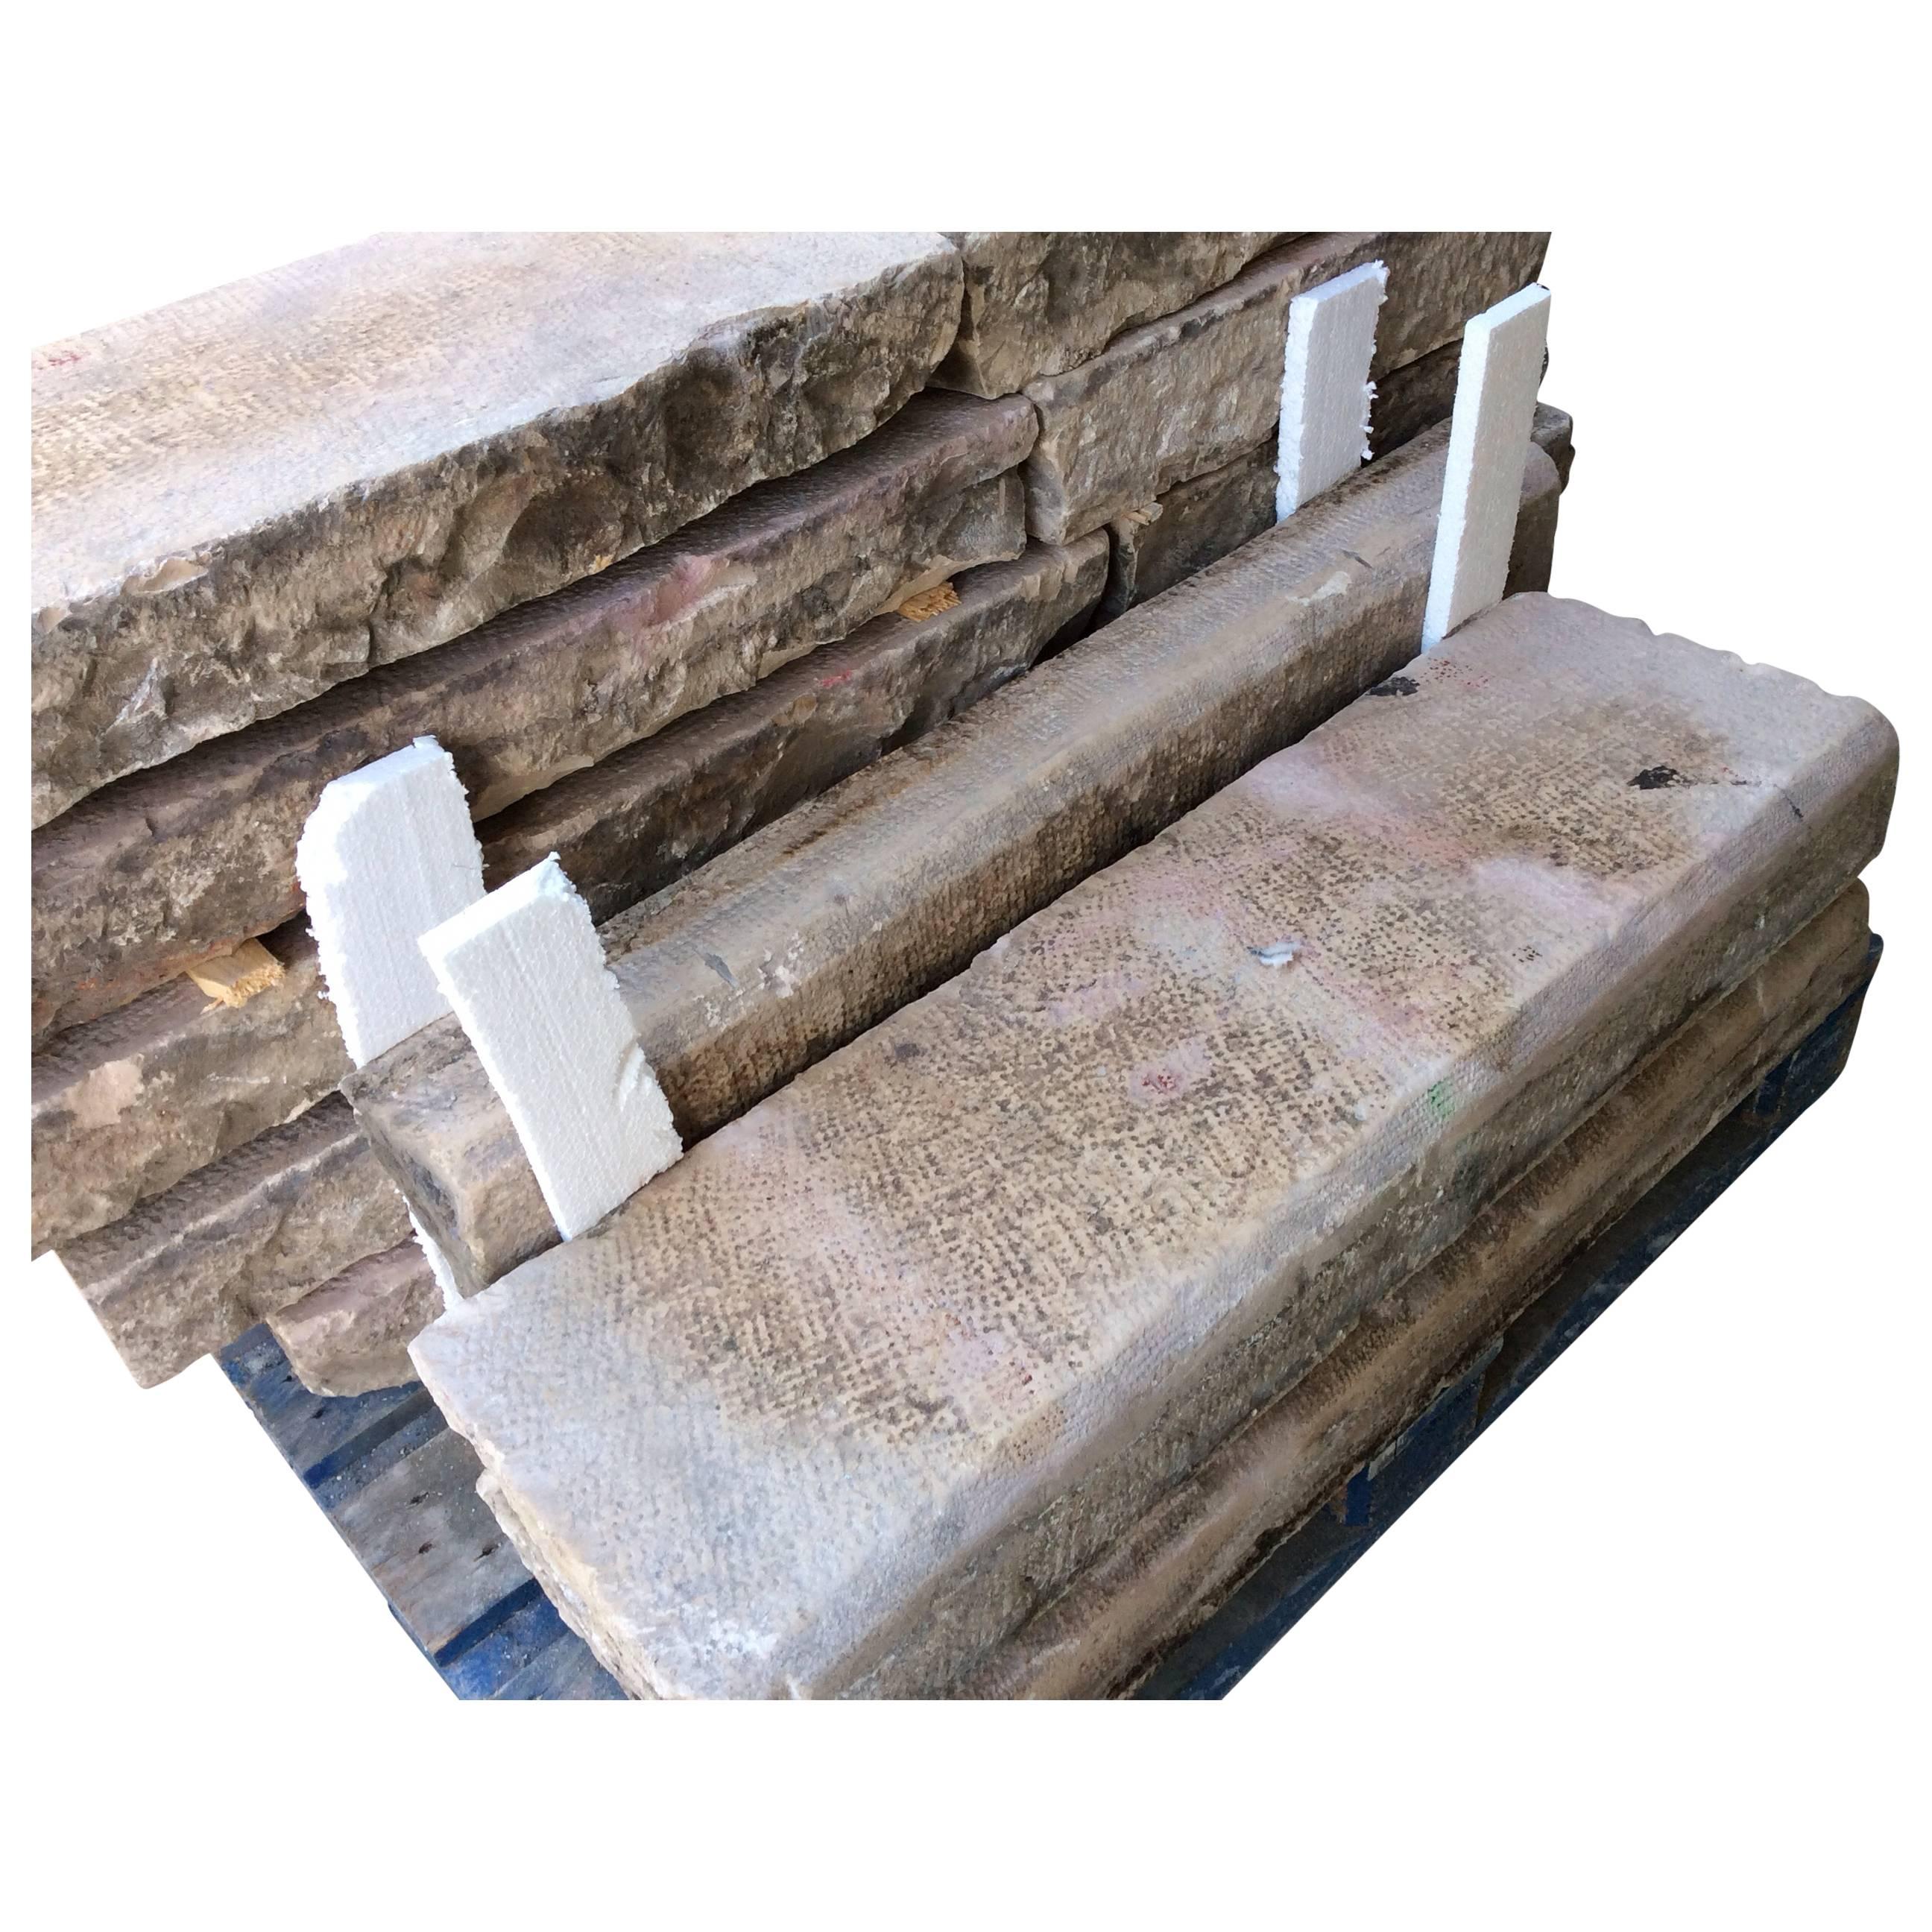 Antique Garden, Architectural Salvage LimeStones, Reclaimed 18th Century,
This Is the Perimeter of Reclaimed Garden from Antique Villas of the 18th Century, height 12 cm ( 4.5 inc ) - depth 35 cm ( 13,8 inc ) -variable length.
with these pieces of